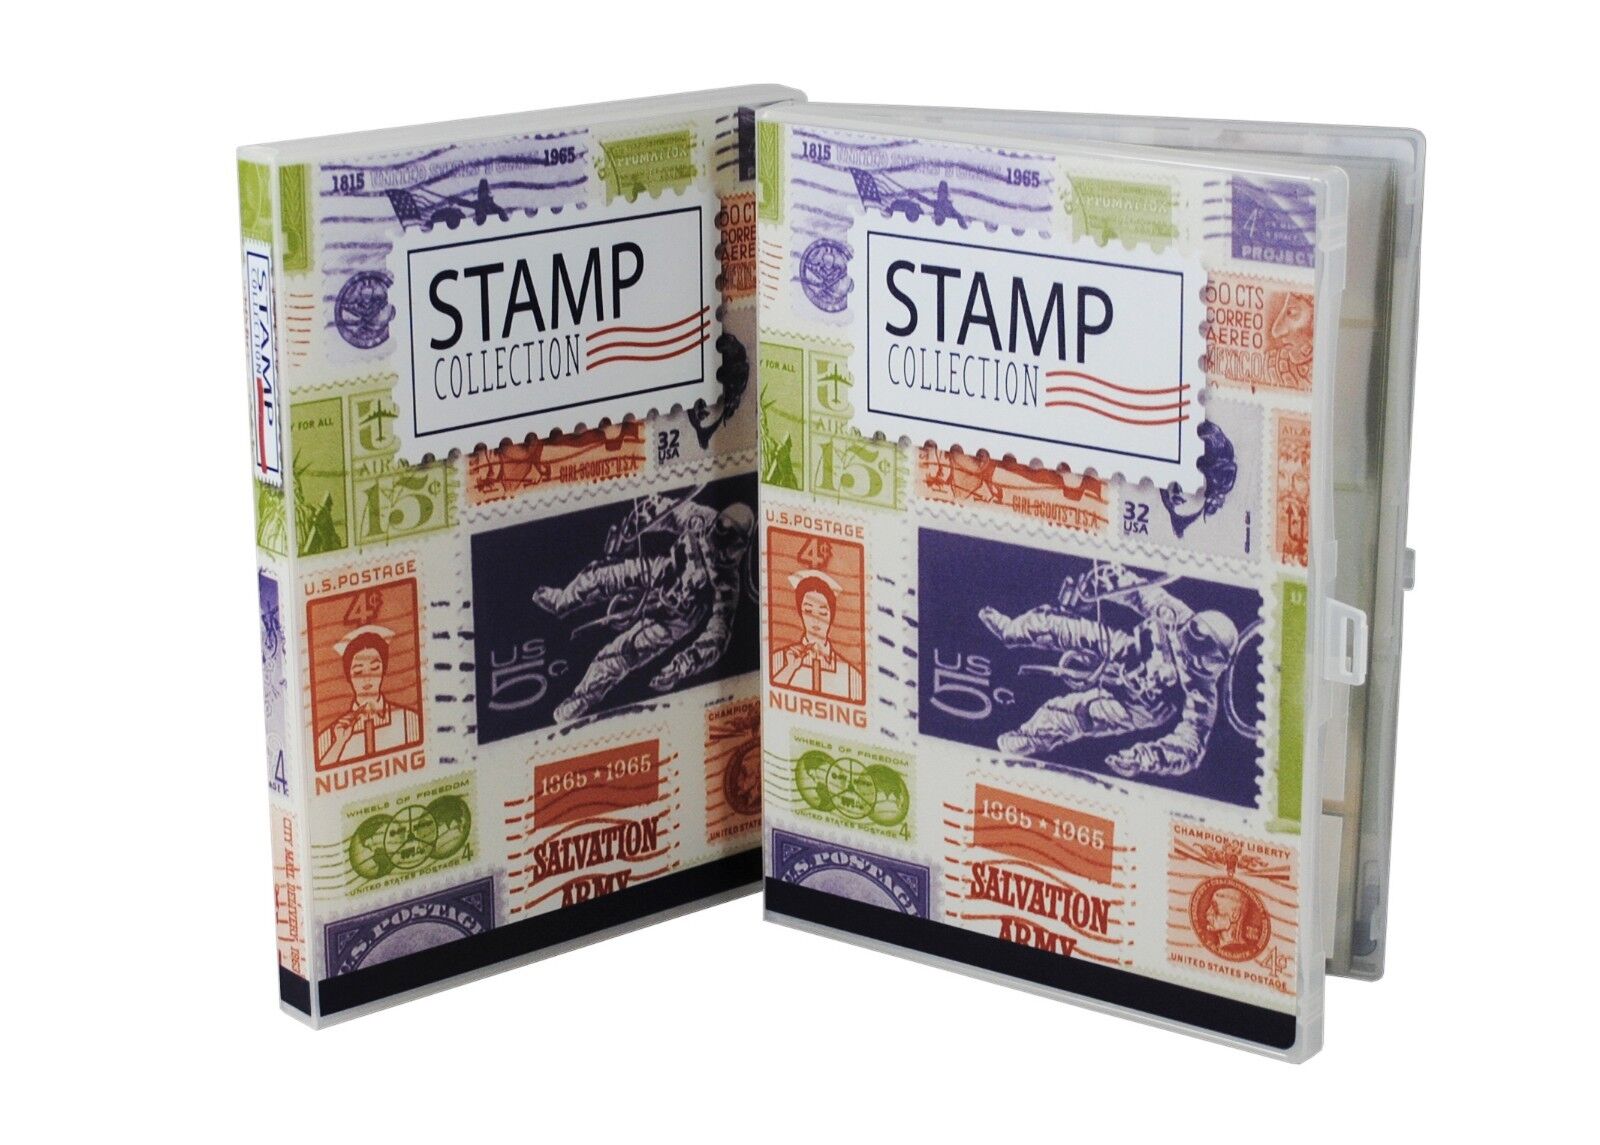 Stamp Collection Kit/Album, w/ 10 Pages, Holds 150-300 Stamps (No Stamps) UniKeep 17094 - фотография #8